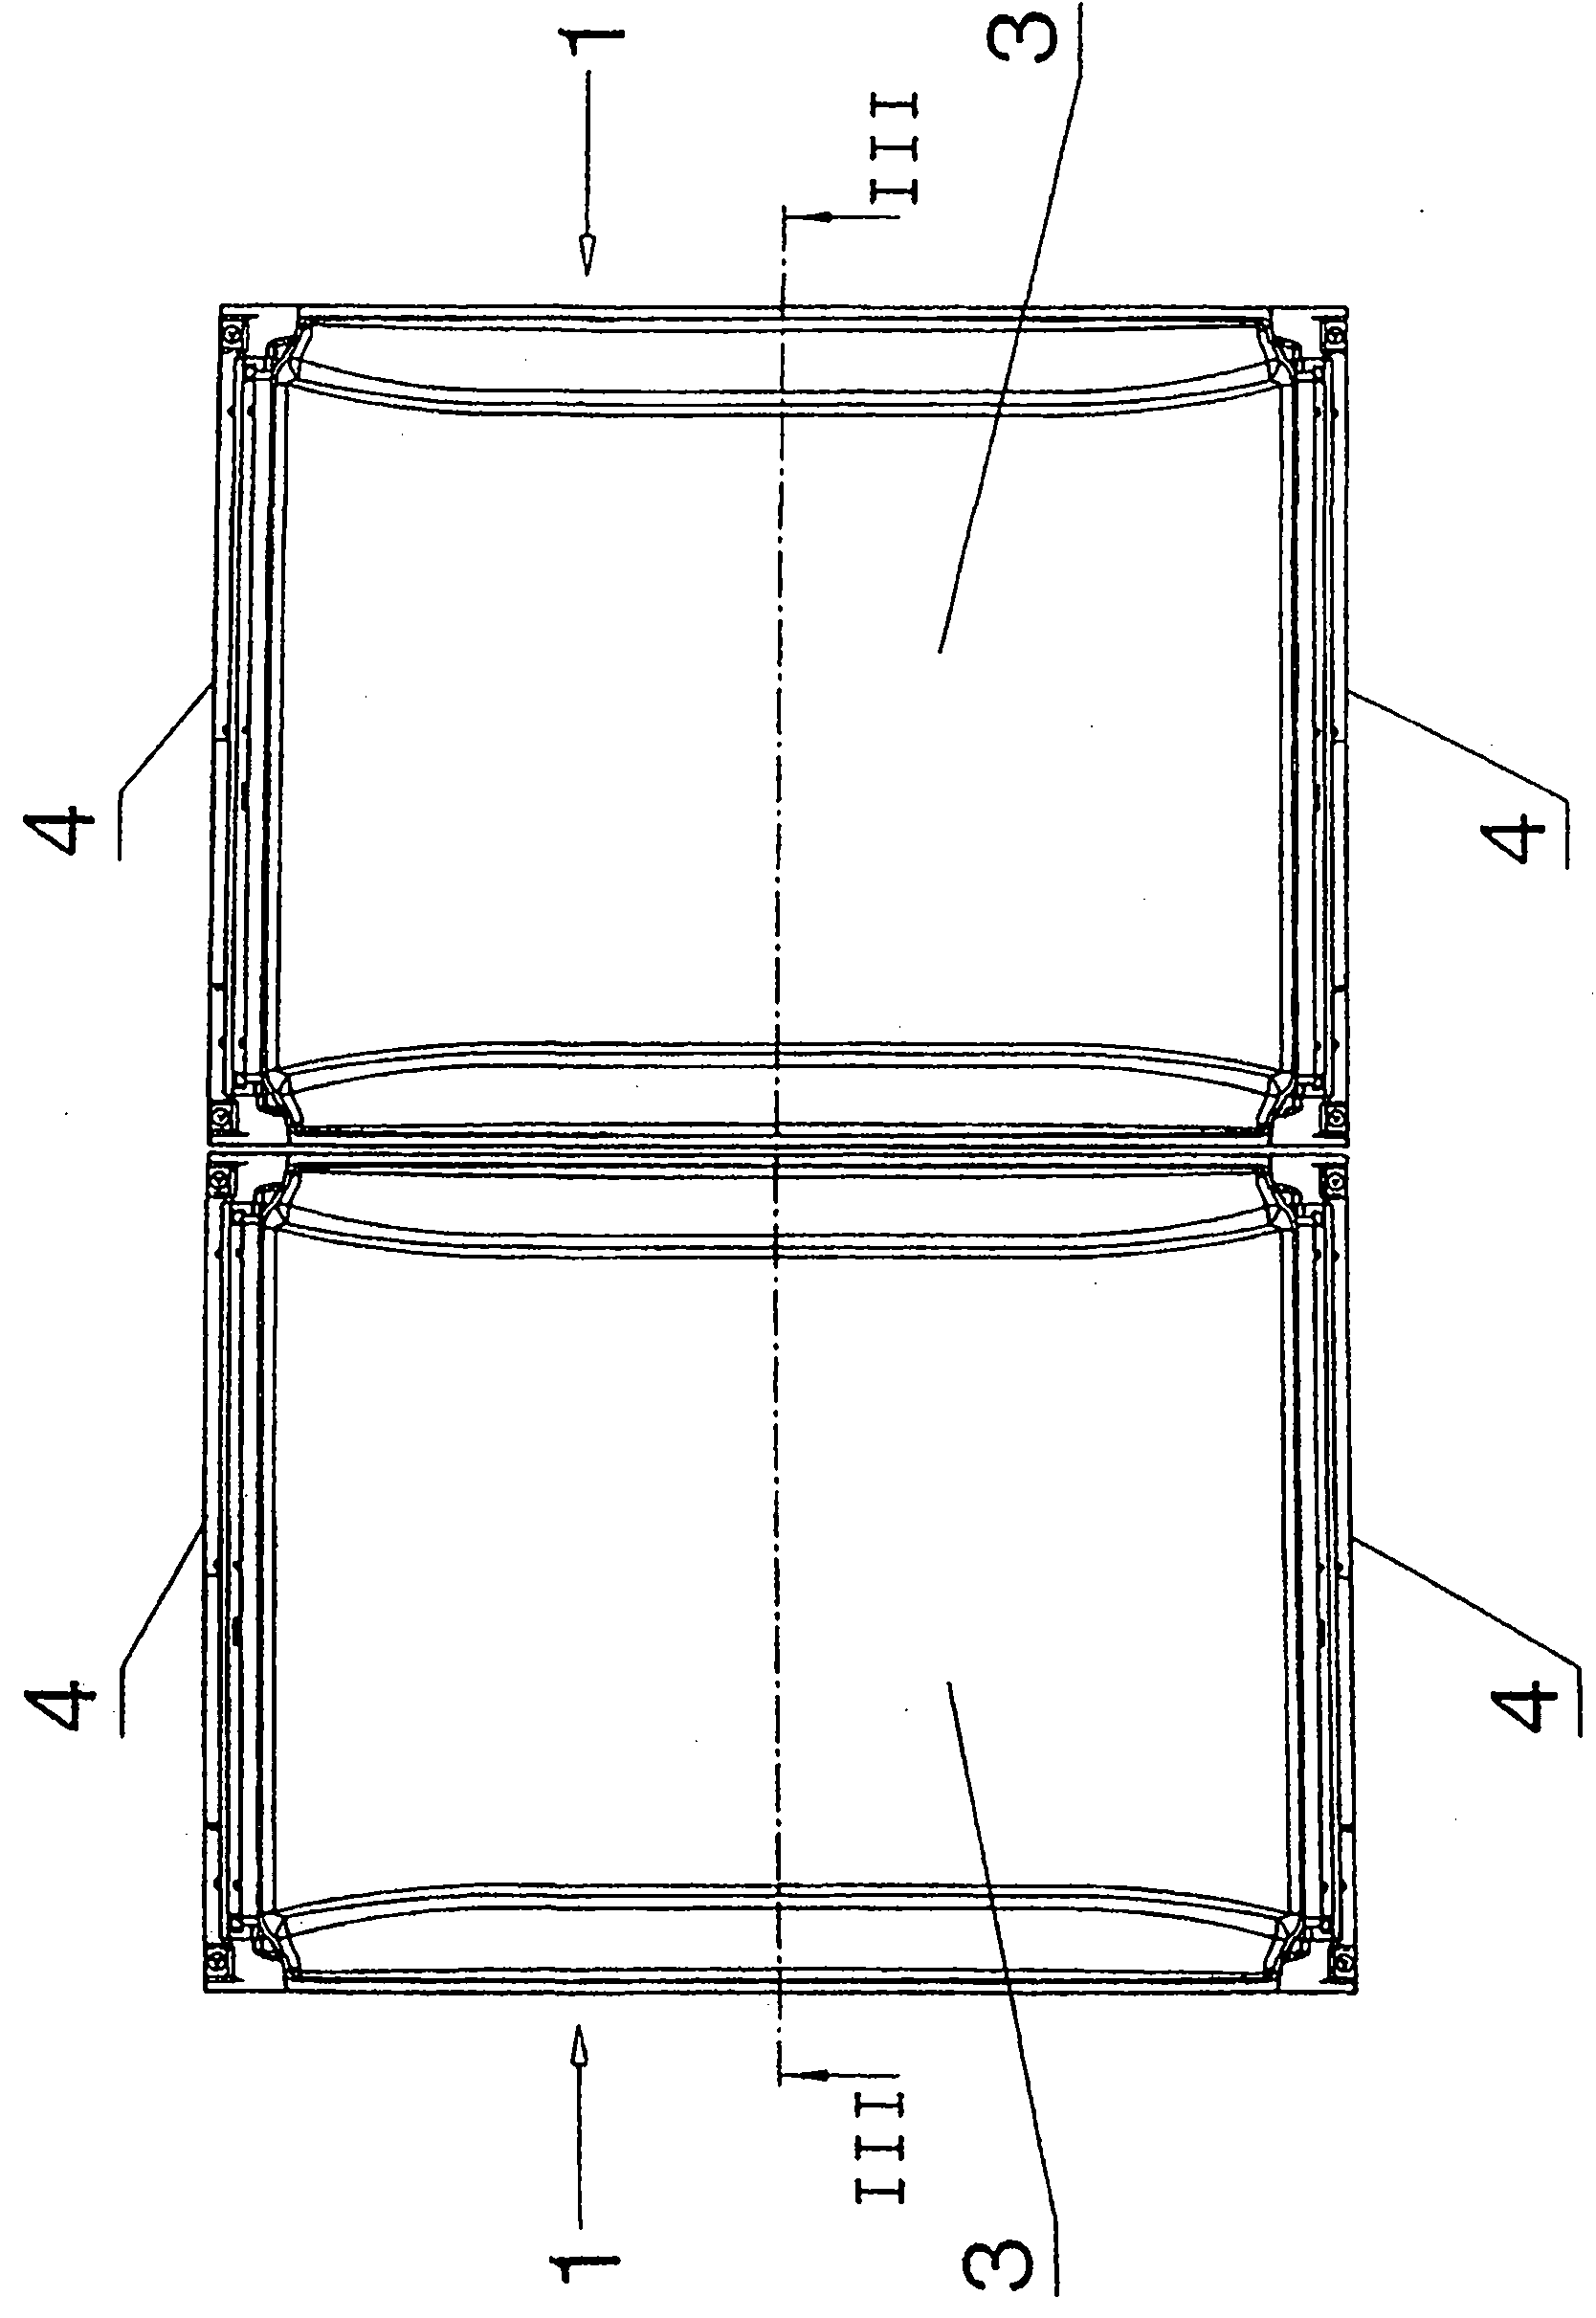 Ceiling panel for lining interior of vehicles